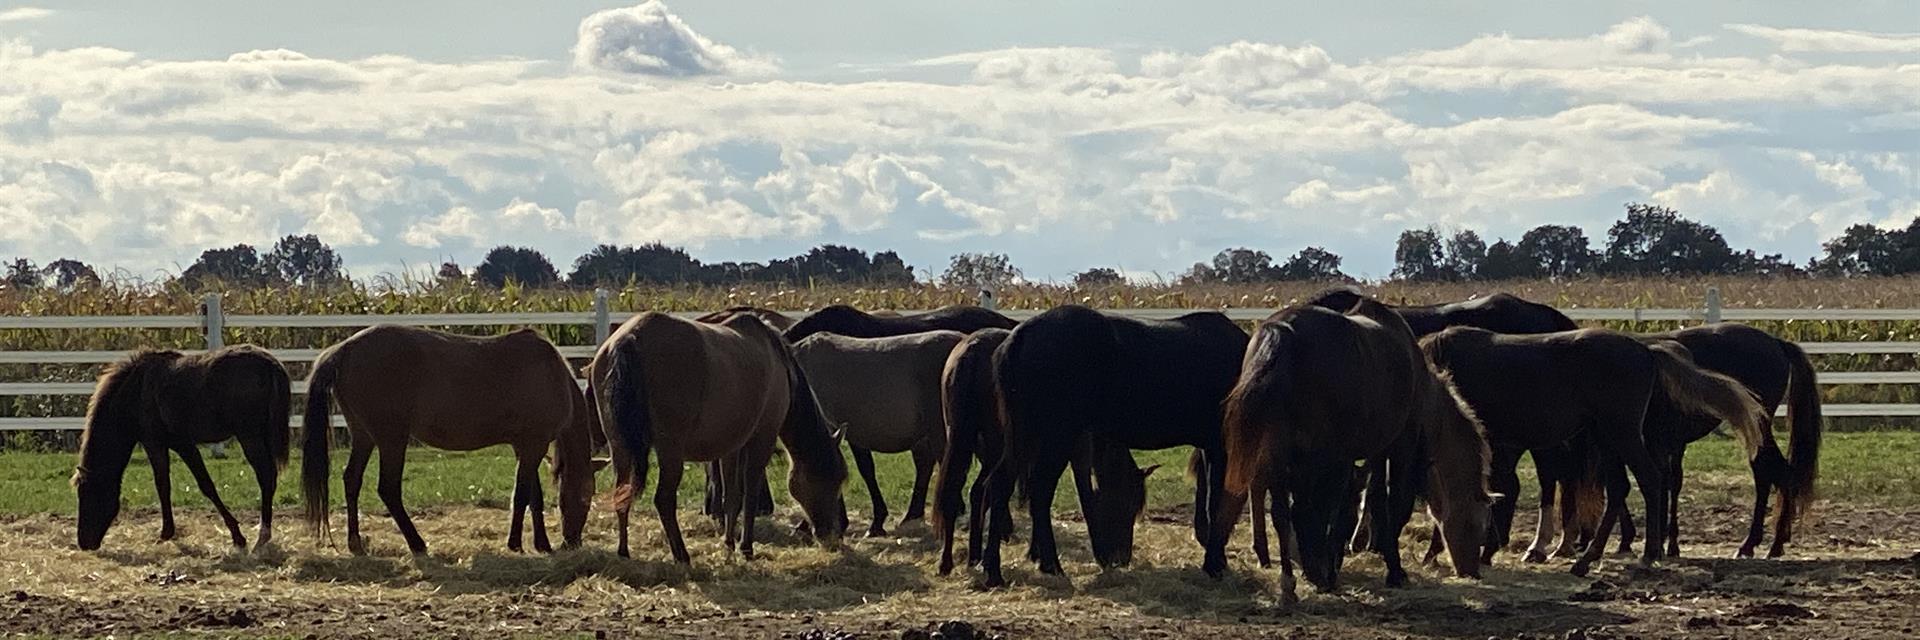 spirit horses gathered in a field together 